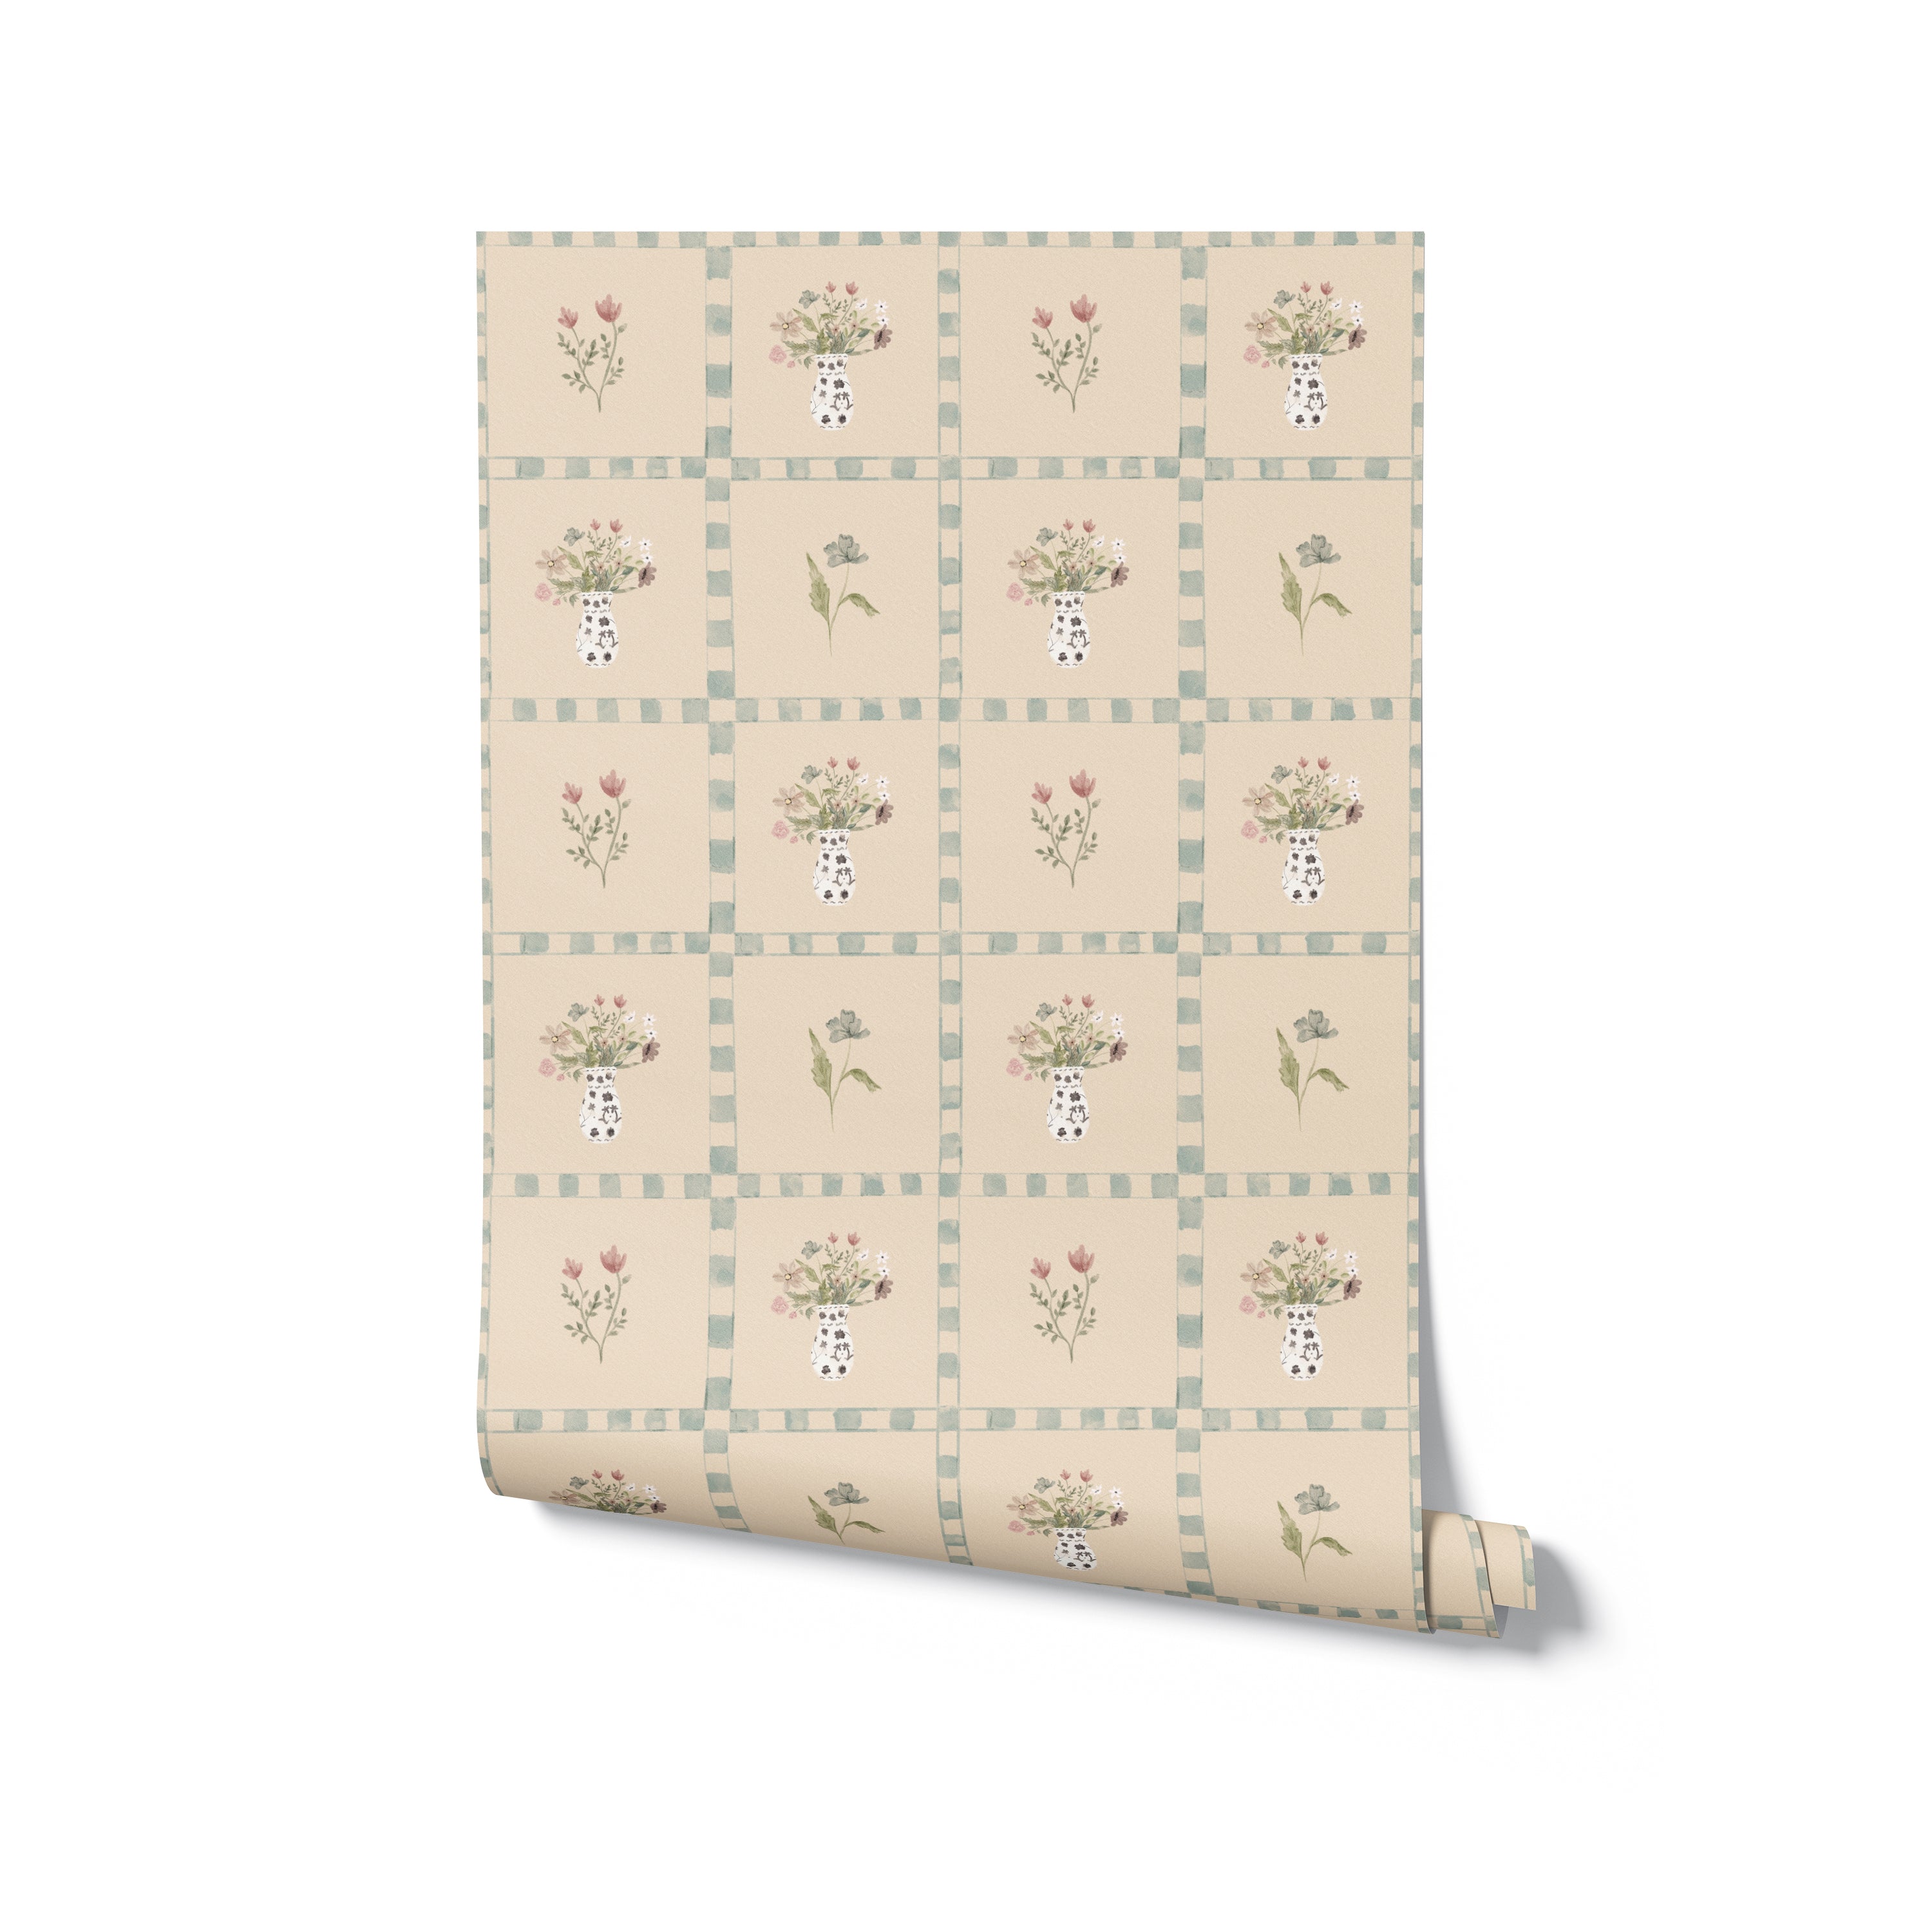 A roll of Cottage Bouquet Wallpaper, showcasing its charming pattern of floral arrangements in vases and individual blooms within a checkered grid design in soothing pastel hues, perfect for adding a cottagecore vibe to any room.